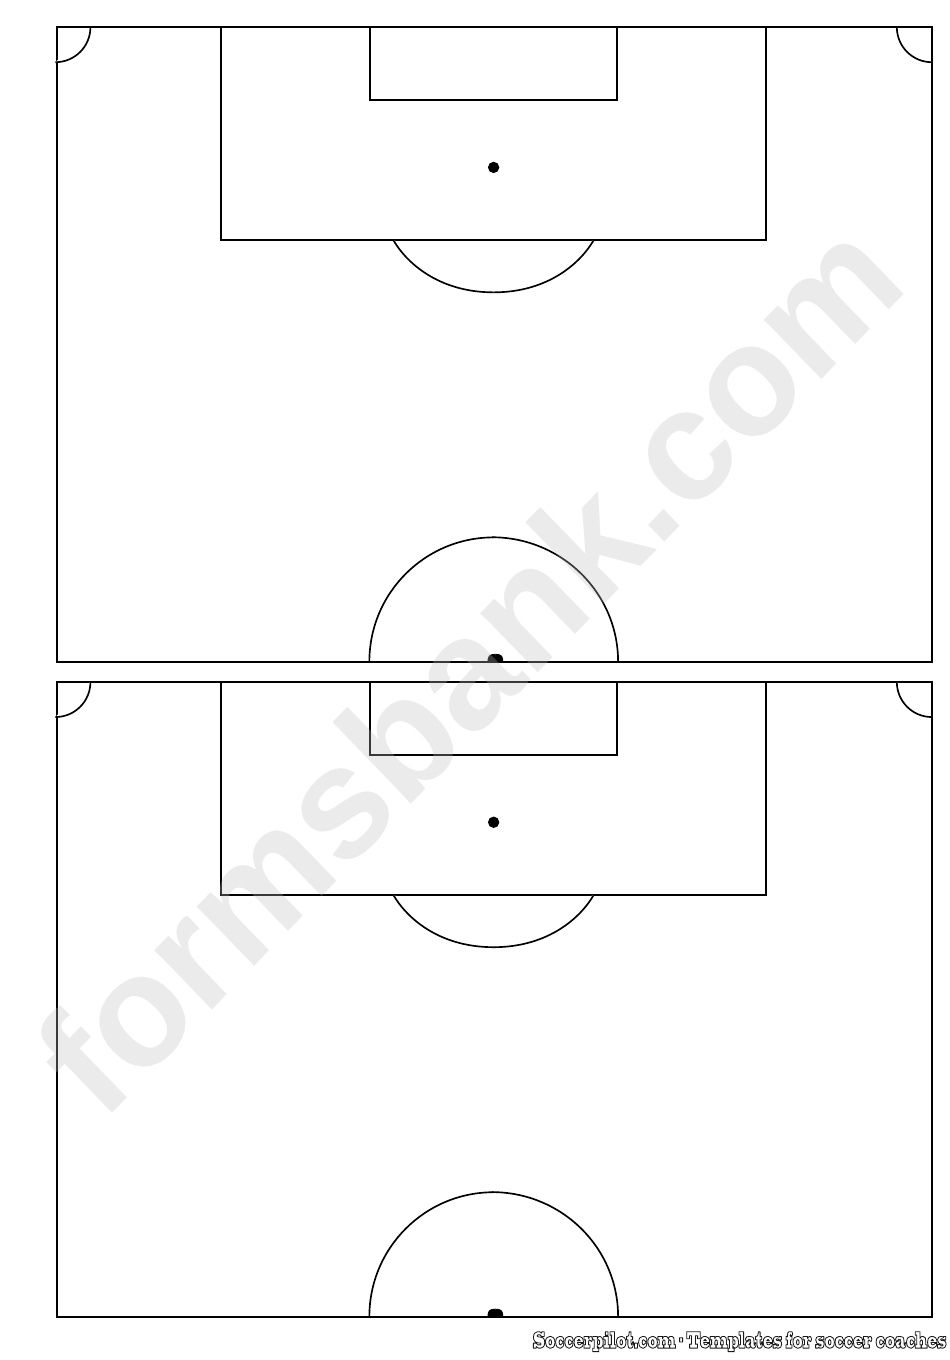 2x Horizontally Soccer Half-Pitches Field Template